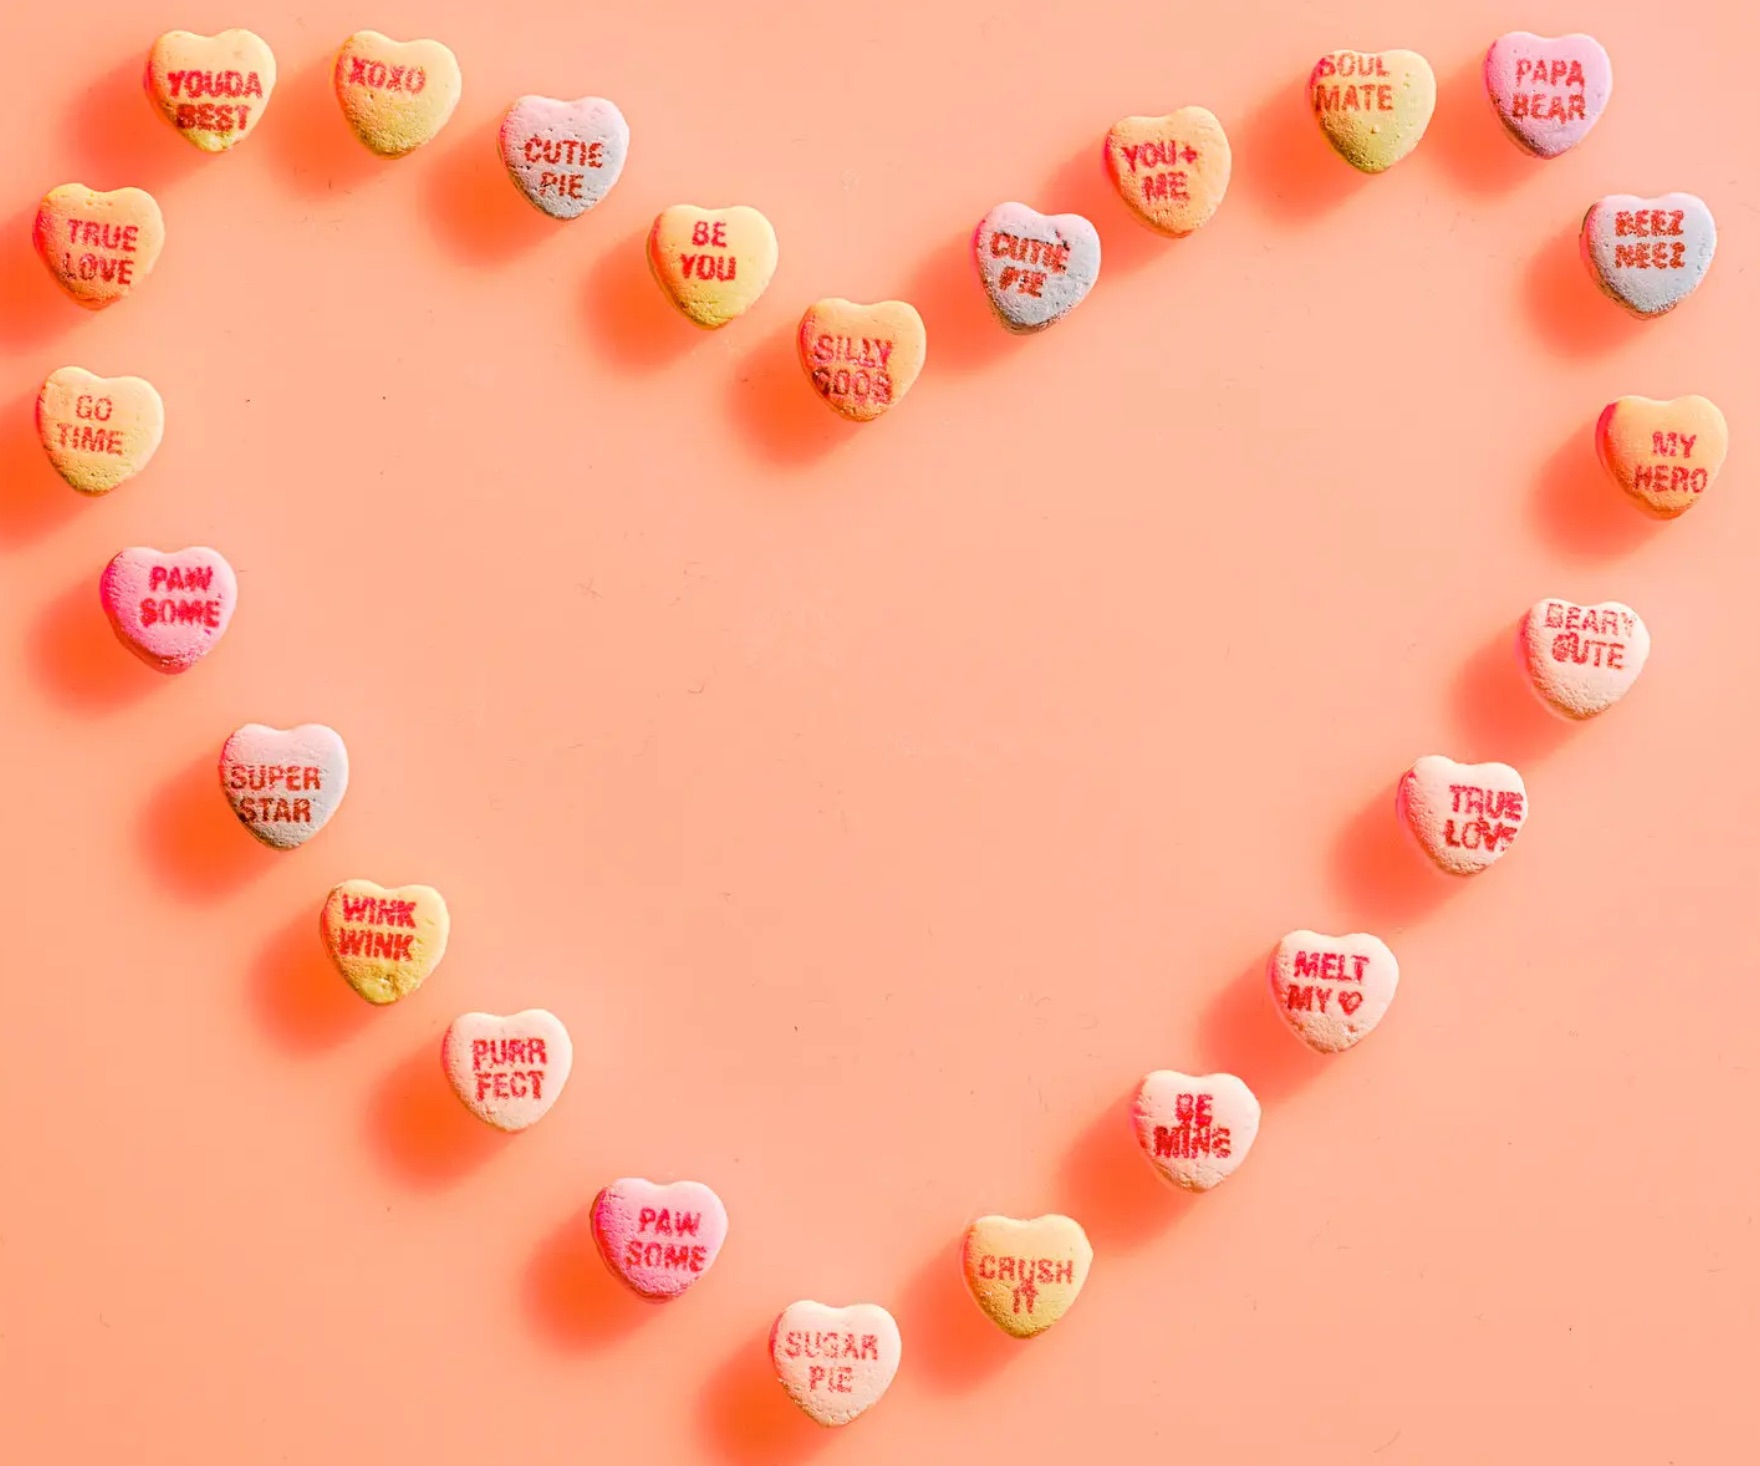 Brach's Introduces New Friends Themed Conversation Hearts For Valentine's  Day